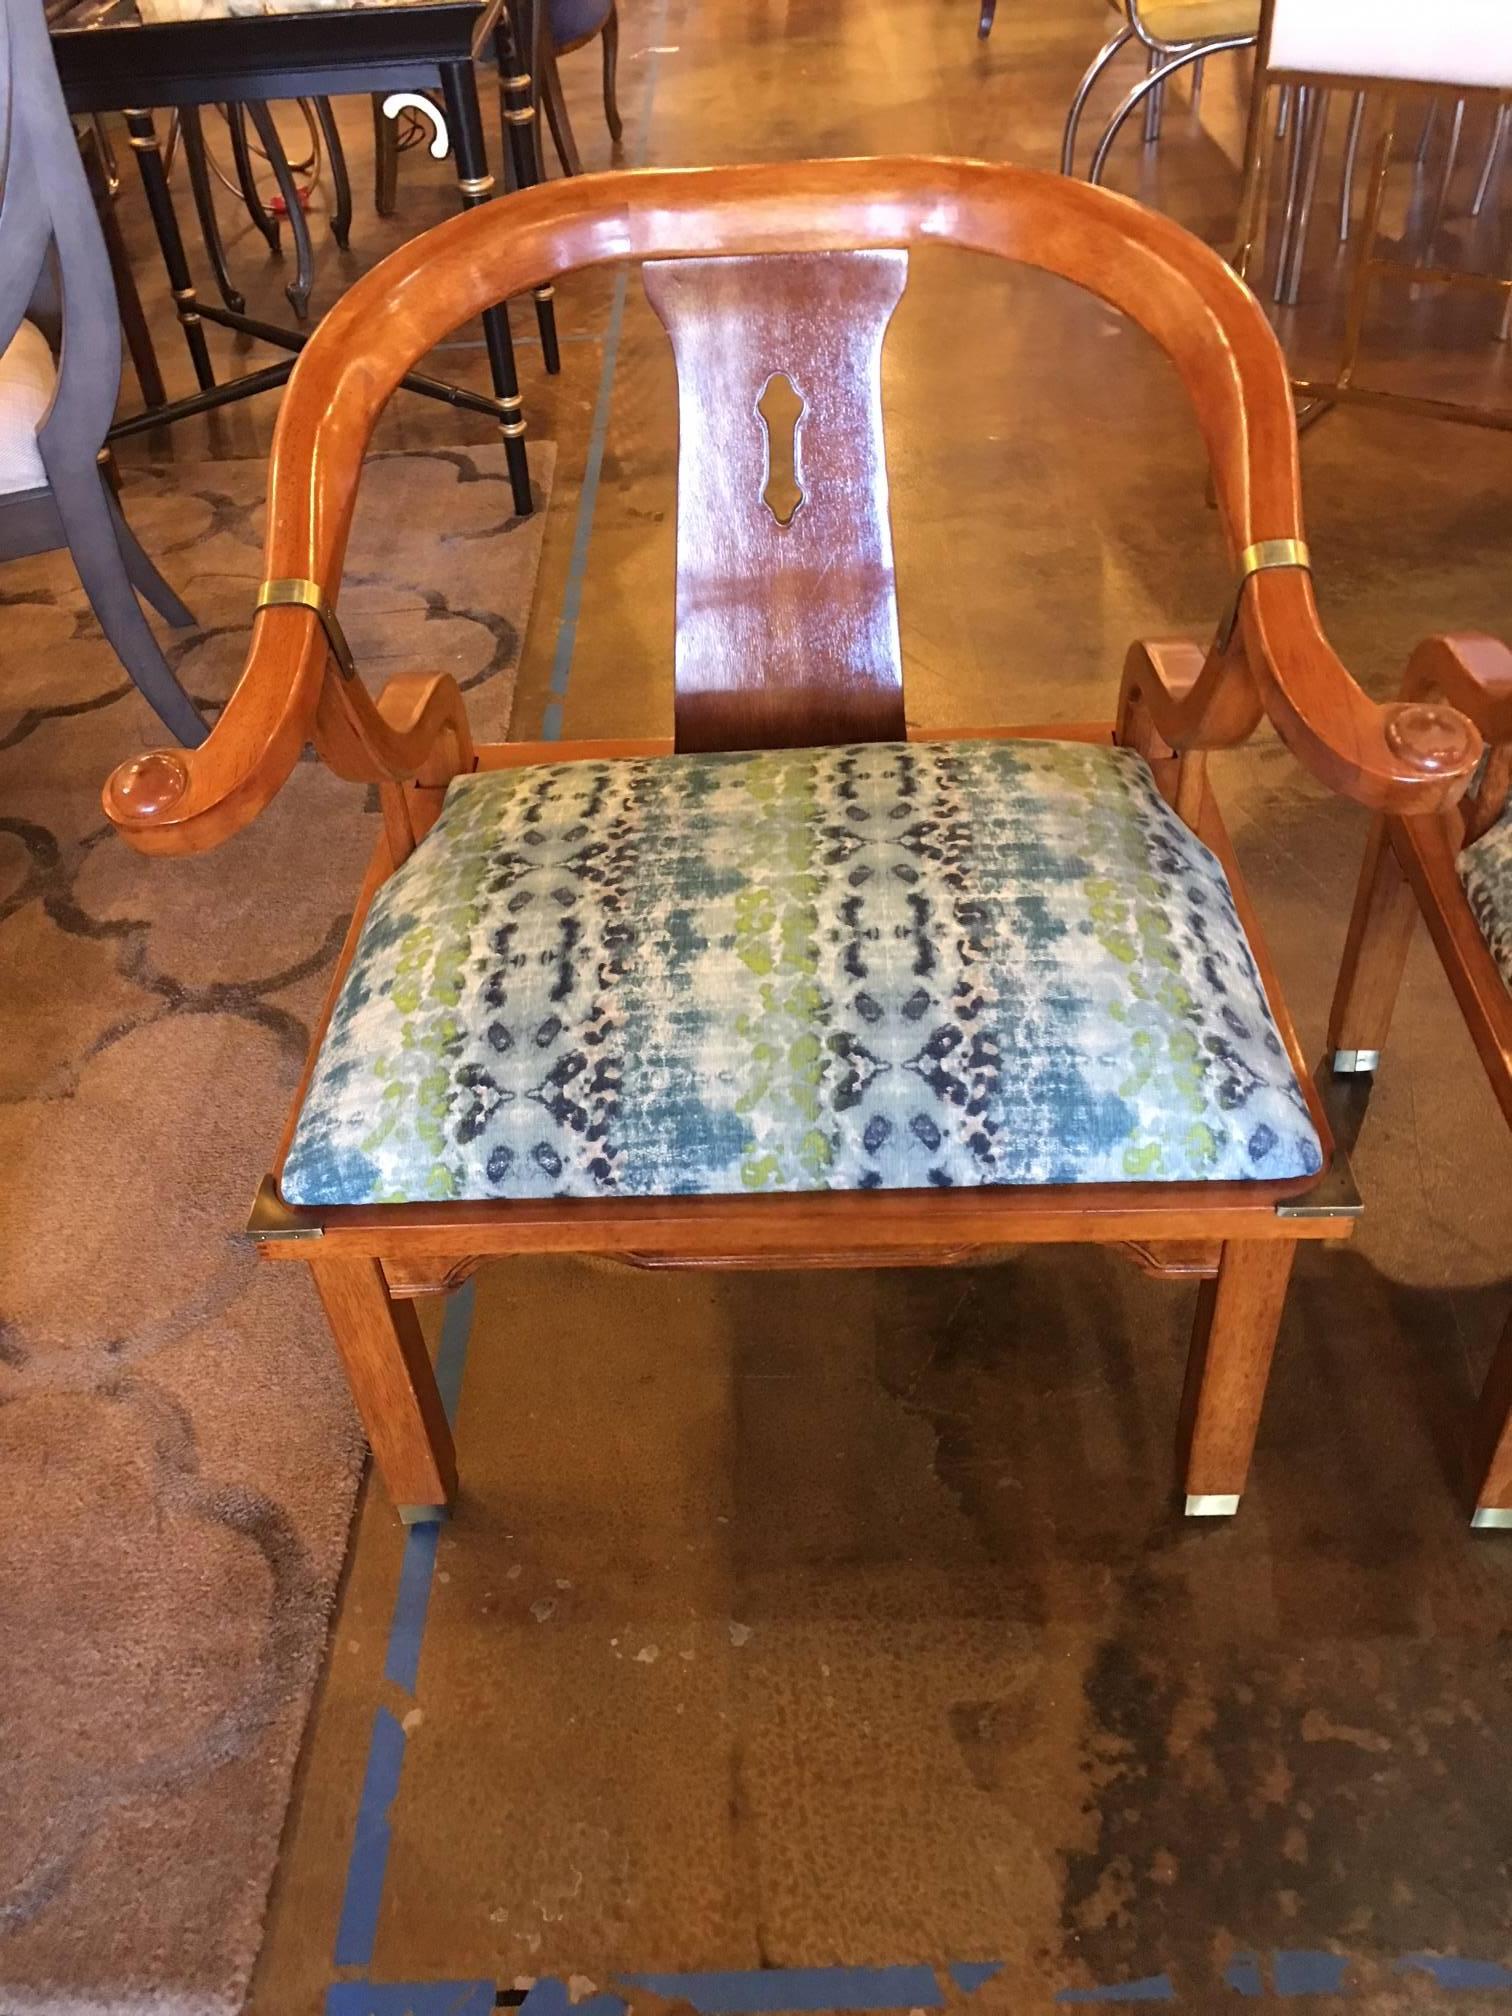 These chairs are by Century, but closely resemble James Mont's horseshoe chairs in the style made famous by James Mont. They have been newly reupholstered in a heavy contemporary linen like weave in shades of blue and green. You often see these